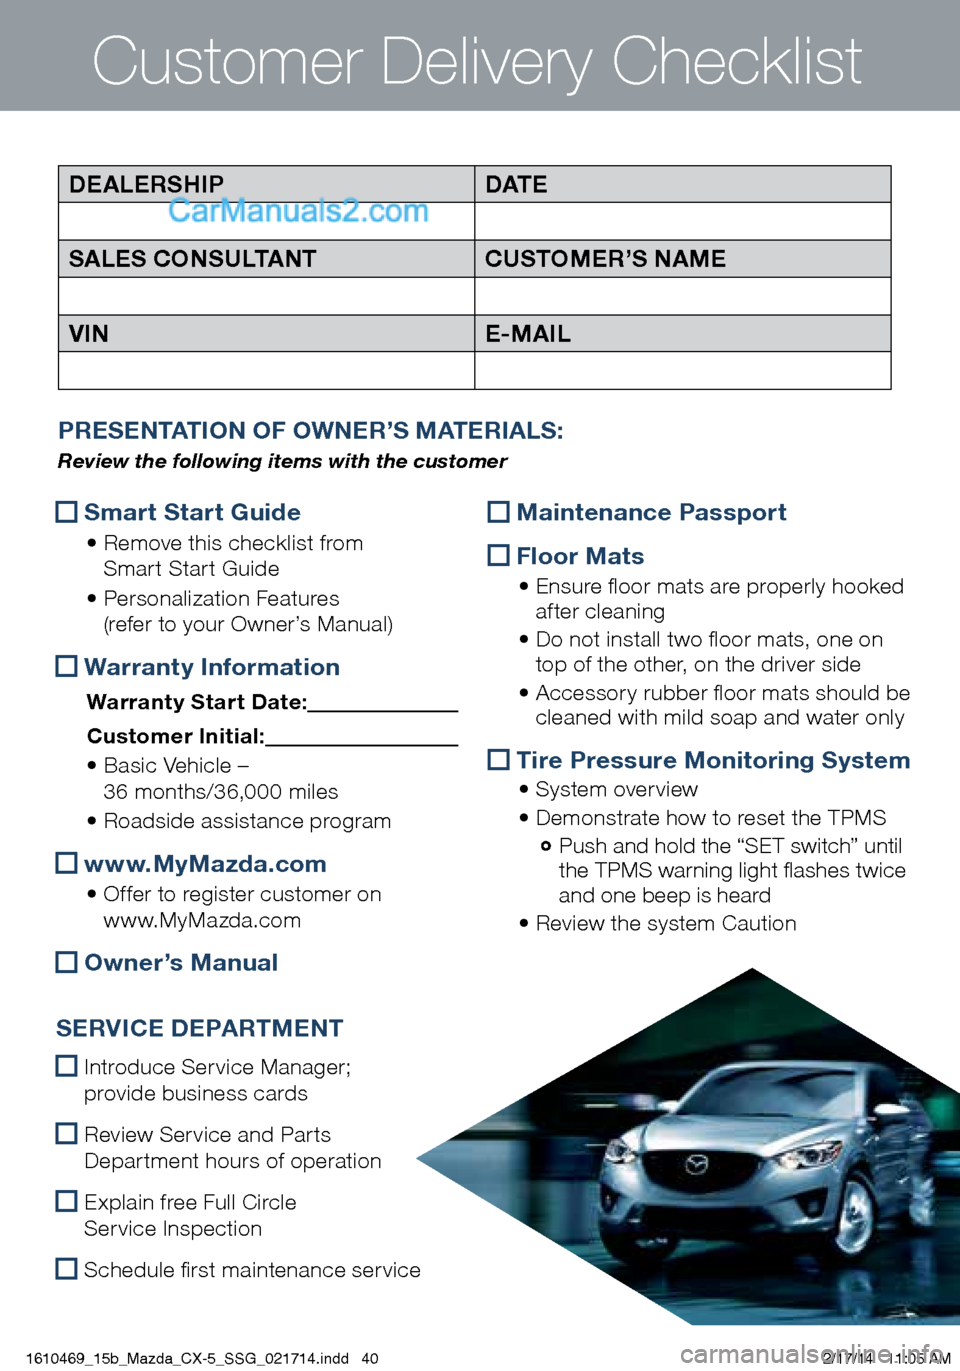 MAZDA MODEL CX-5 2015  Smart Start Guide (in English) Customer Delivery Checklist
PRESENTATION OF OWNER’S MATERIALS:  
Review the following items with the customer
DEALERSHIPDAT E
SALES CONSULTANT CUSTOMER’S NAME
VIN E-MAIL
 Smart Start Guide
 
•  